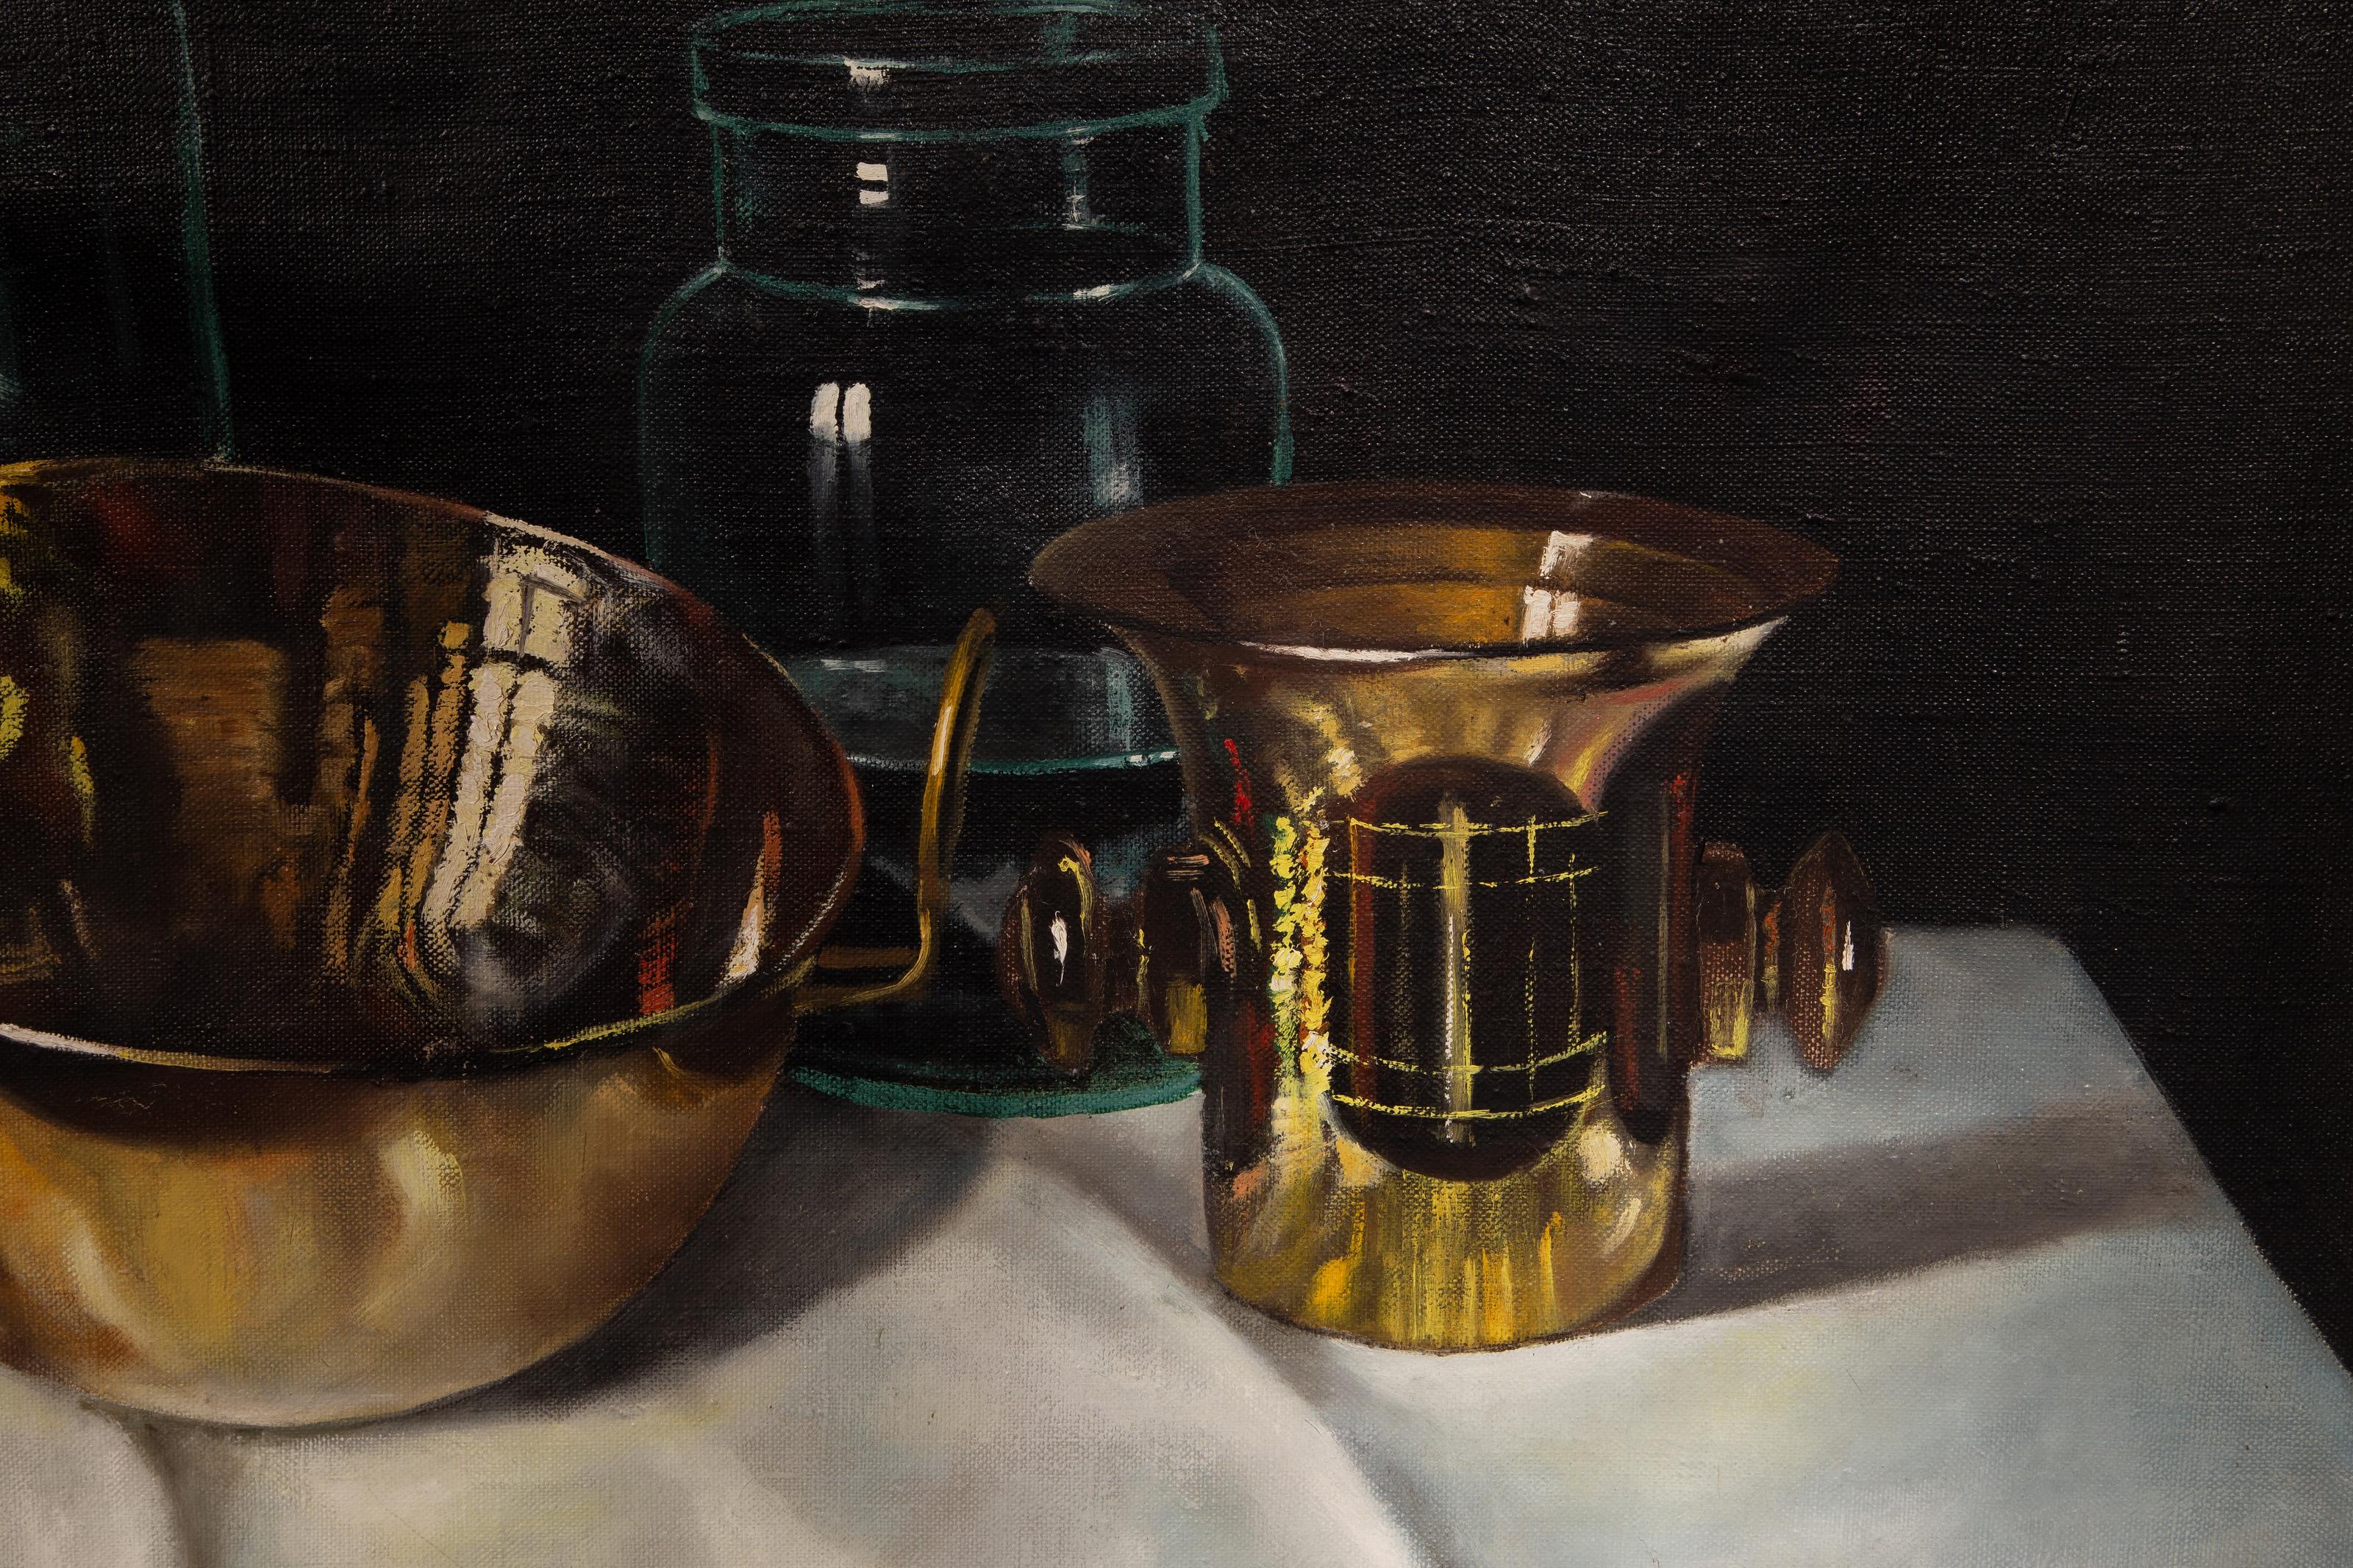 A Photorealist Still Life of several metal and glass containers on a covered surface. This oil painting by Andras Gombar is signed in the lower right.

Vases Still Life
András Gombár, Hungarian (1946)
Date: circa 1980
Oil on Canvas, signed lower